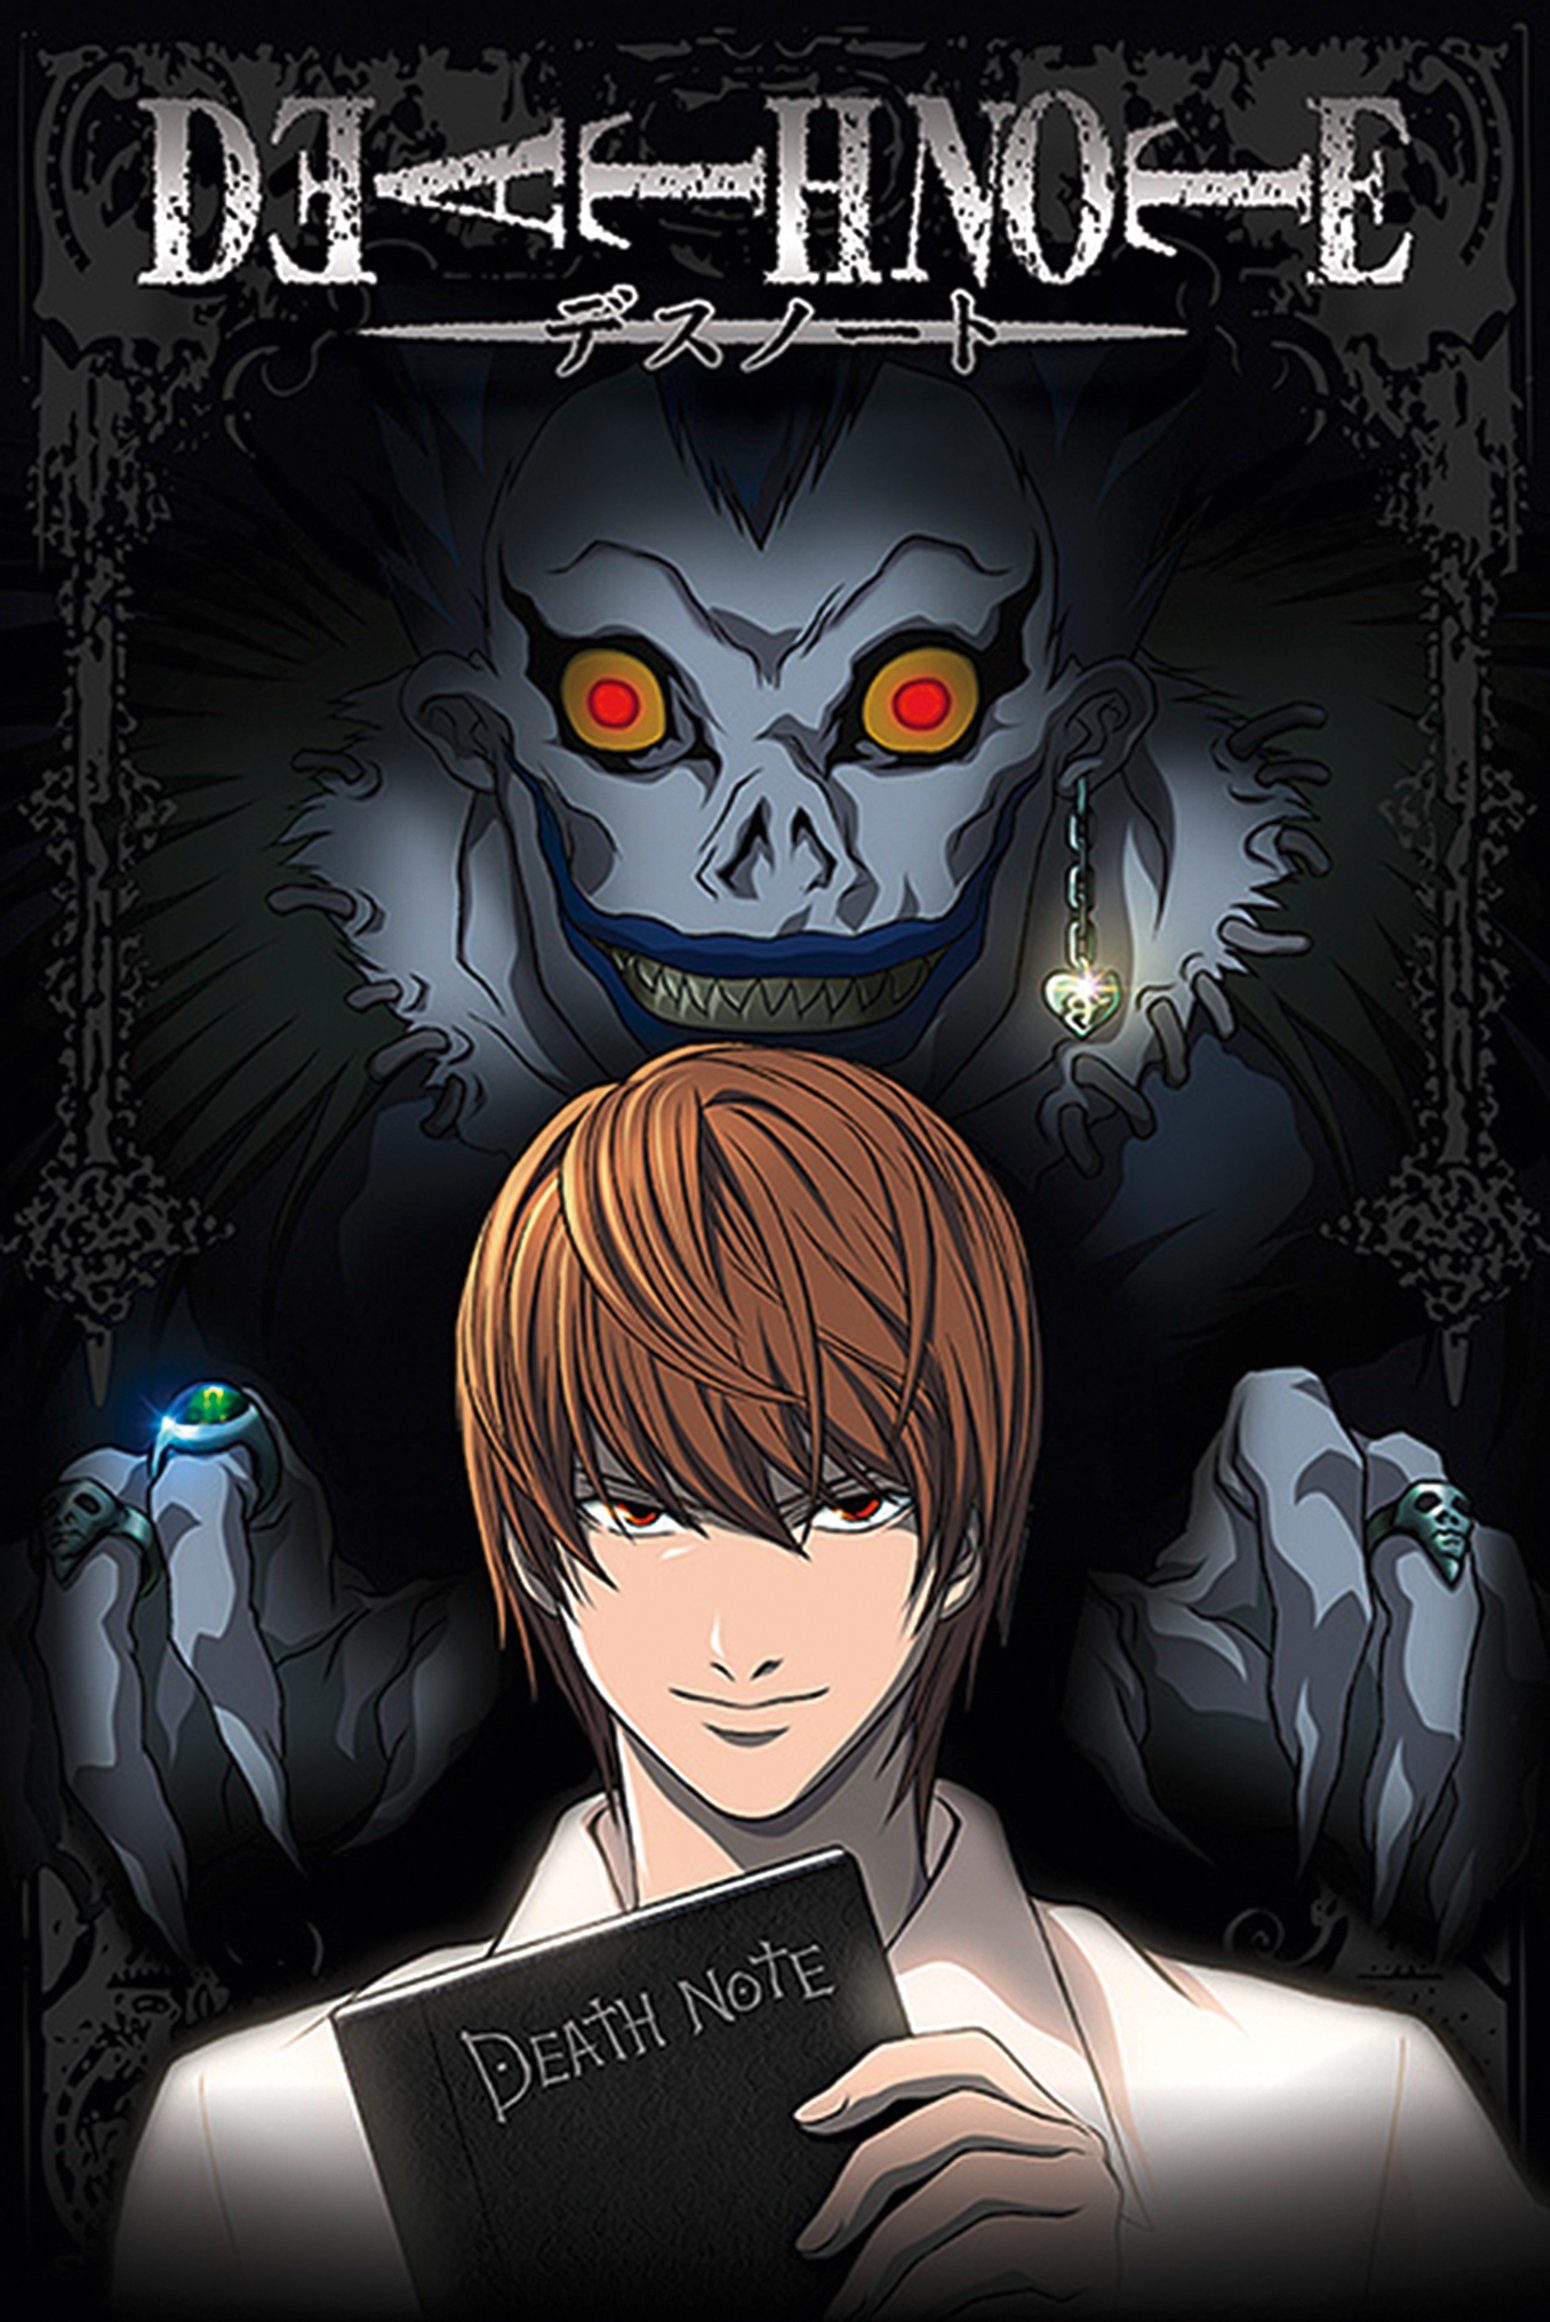 PYRAMID Poster Death Note Poster From The Shadows 61 x 91,5 cm